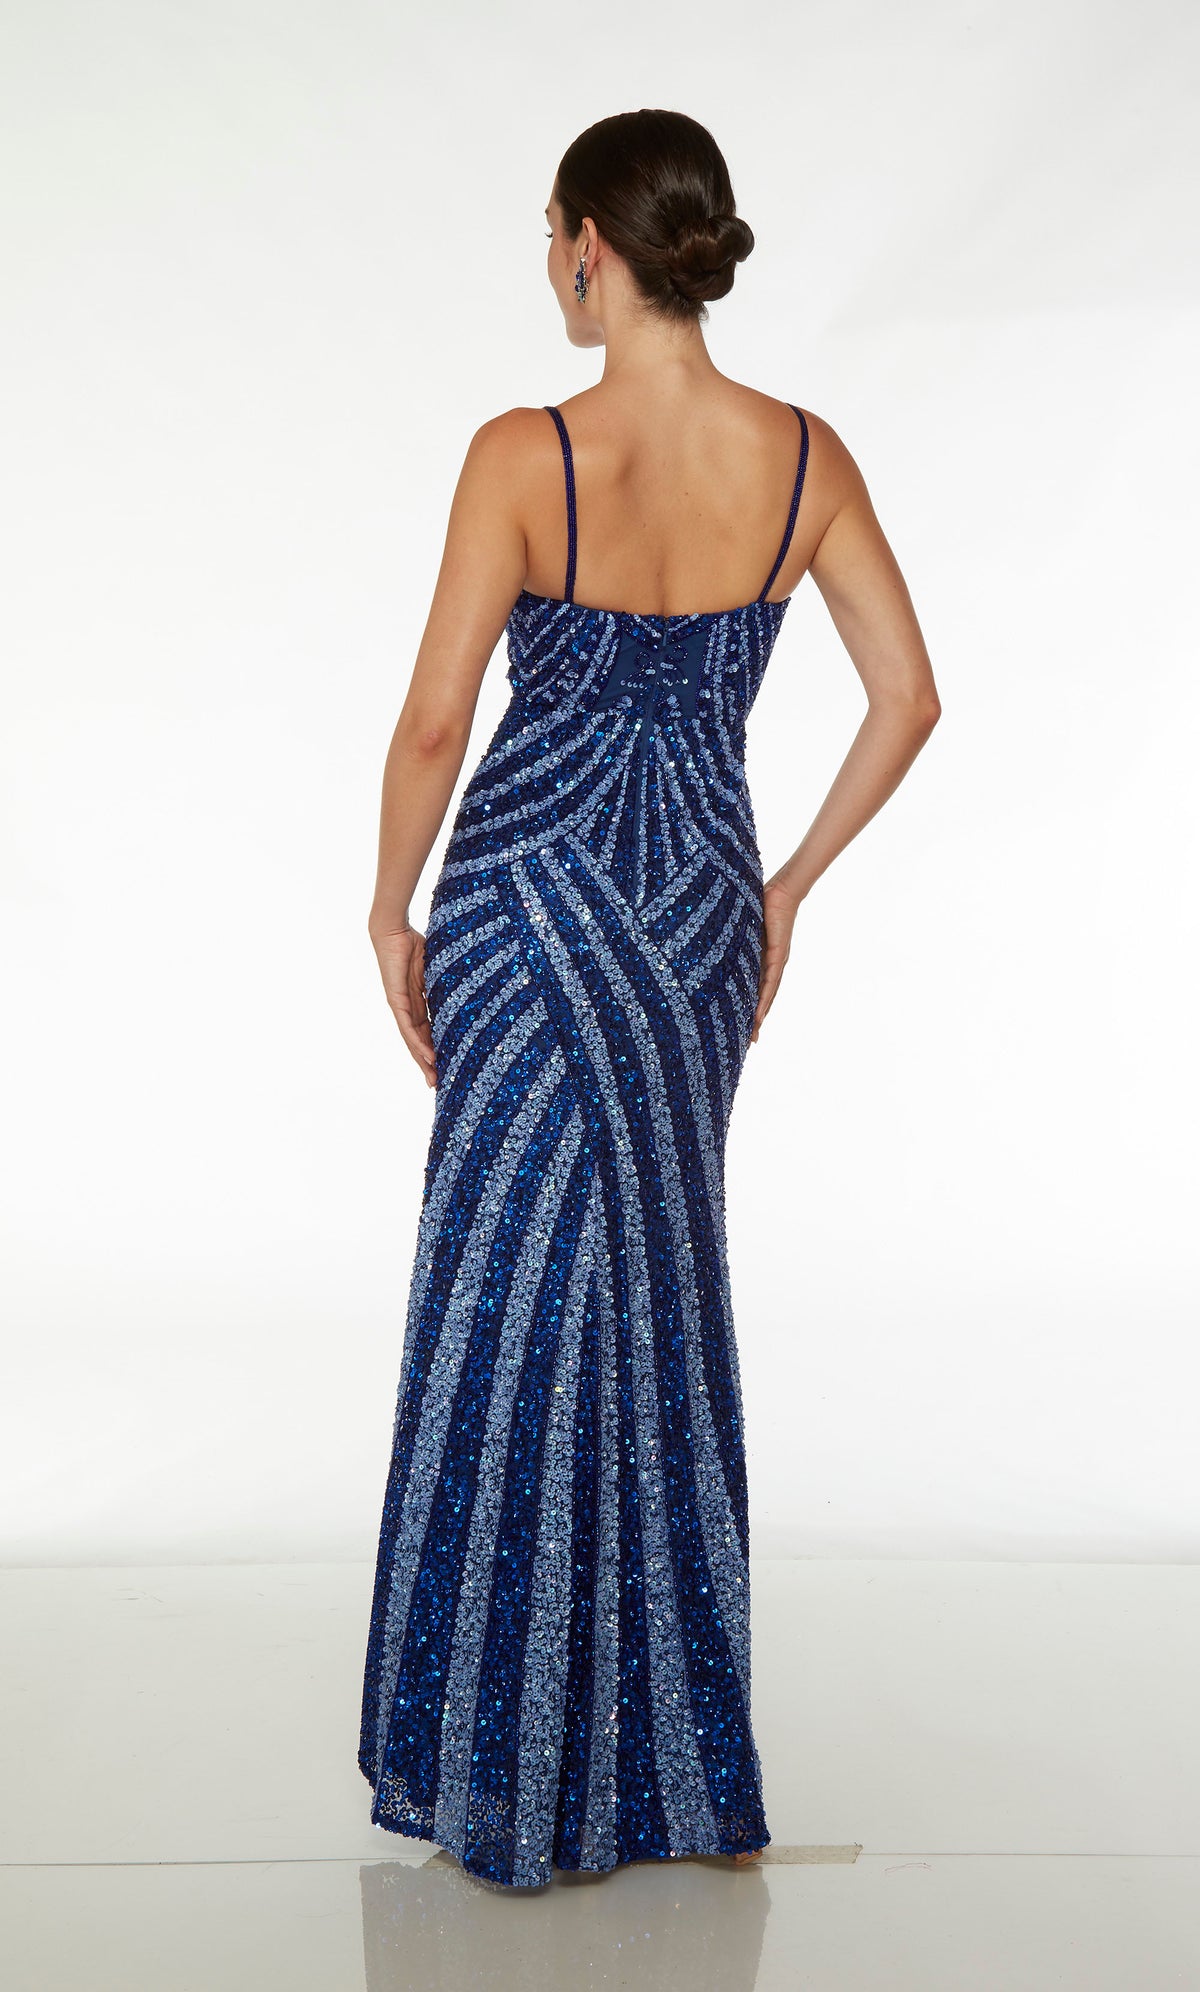 Chic fit-and-flare prom dress in French blue and royal blue sequins: plunging neckline, spaghetti straps, zip-up back—an elegant ensemble.